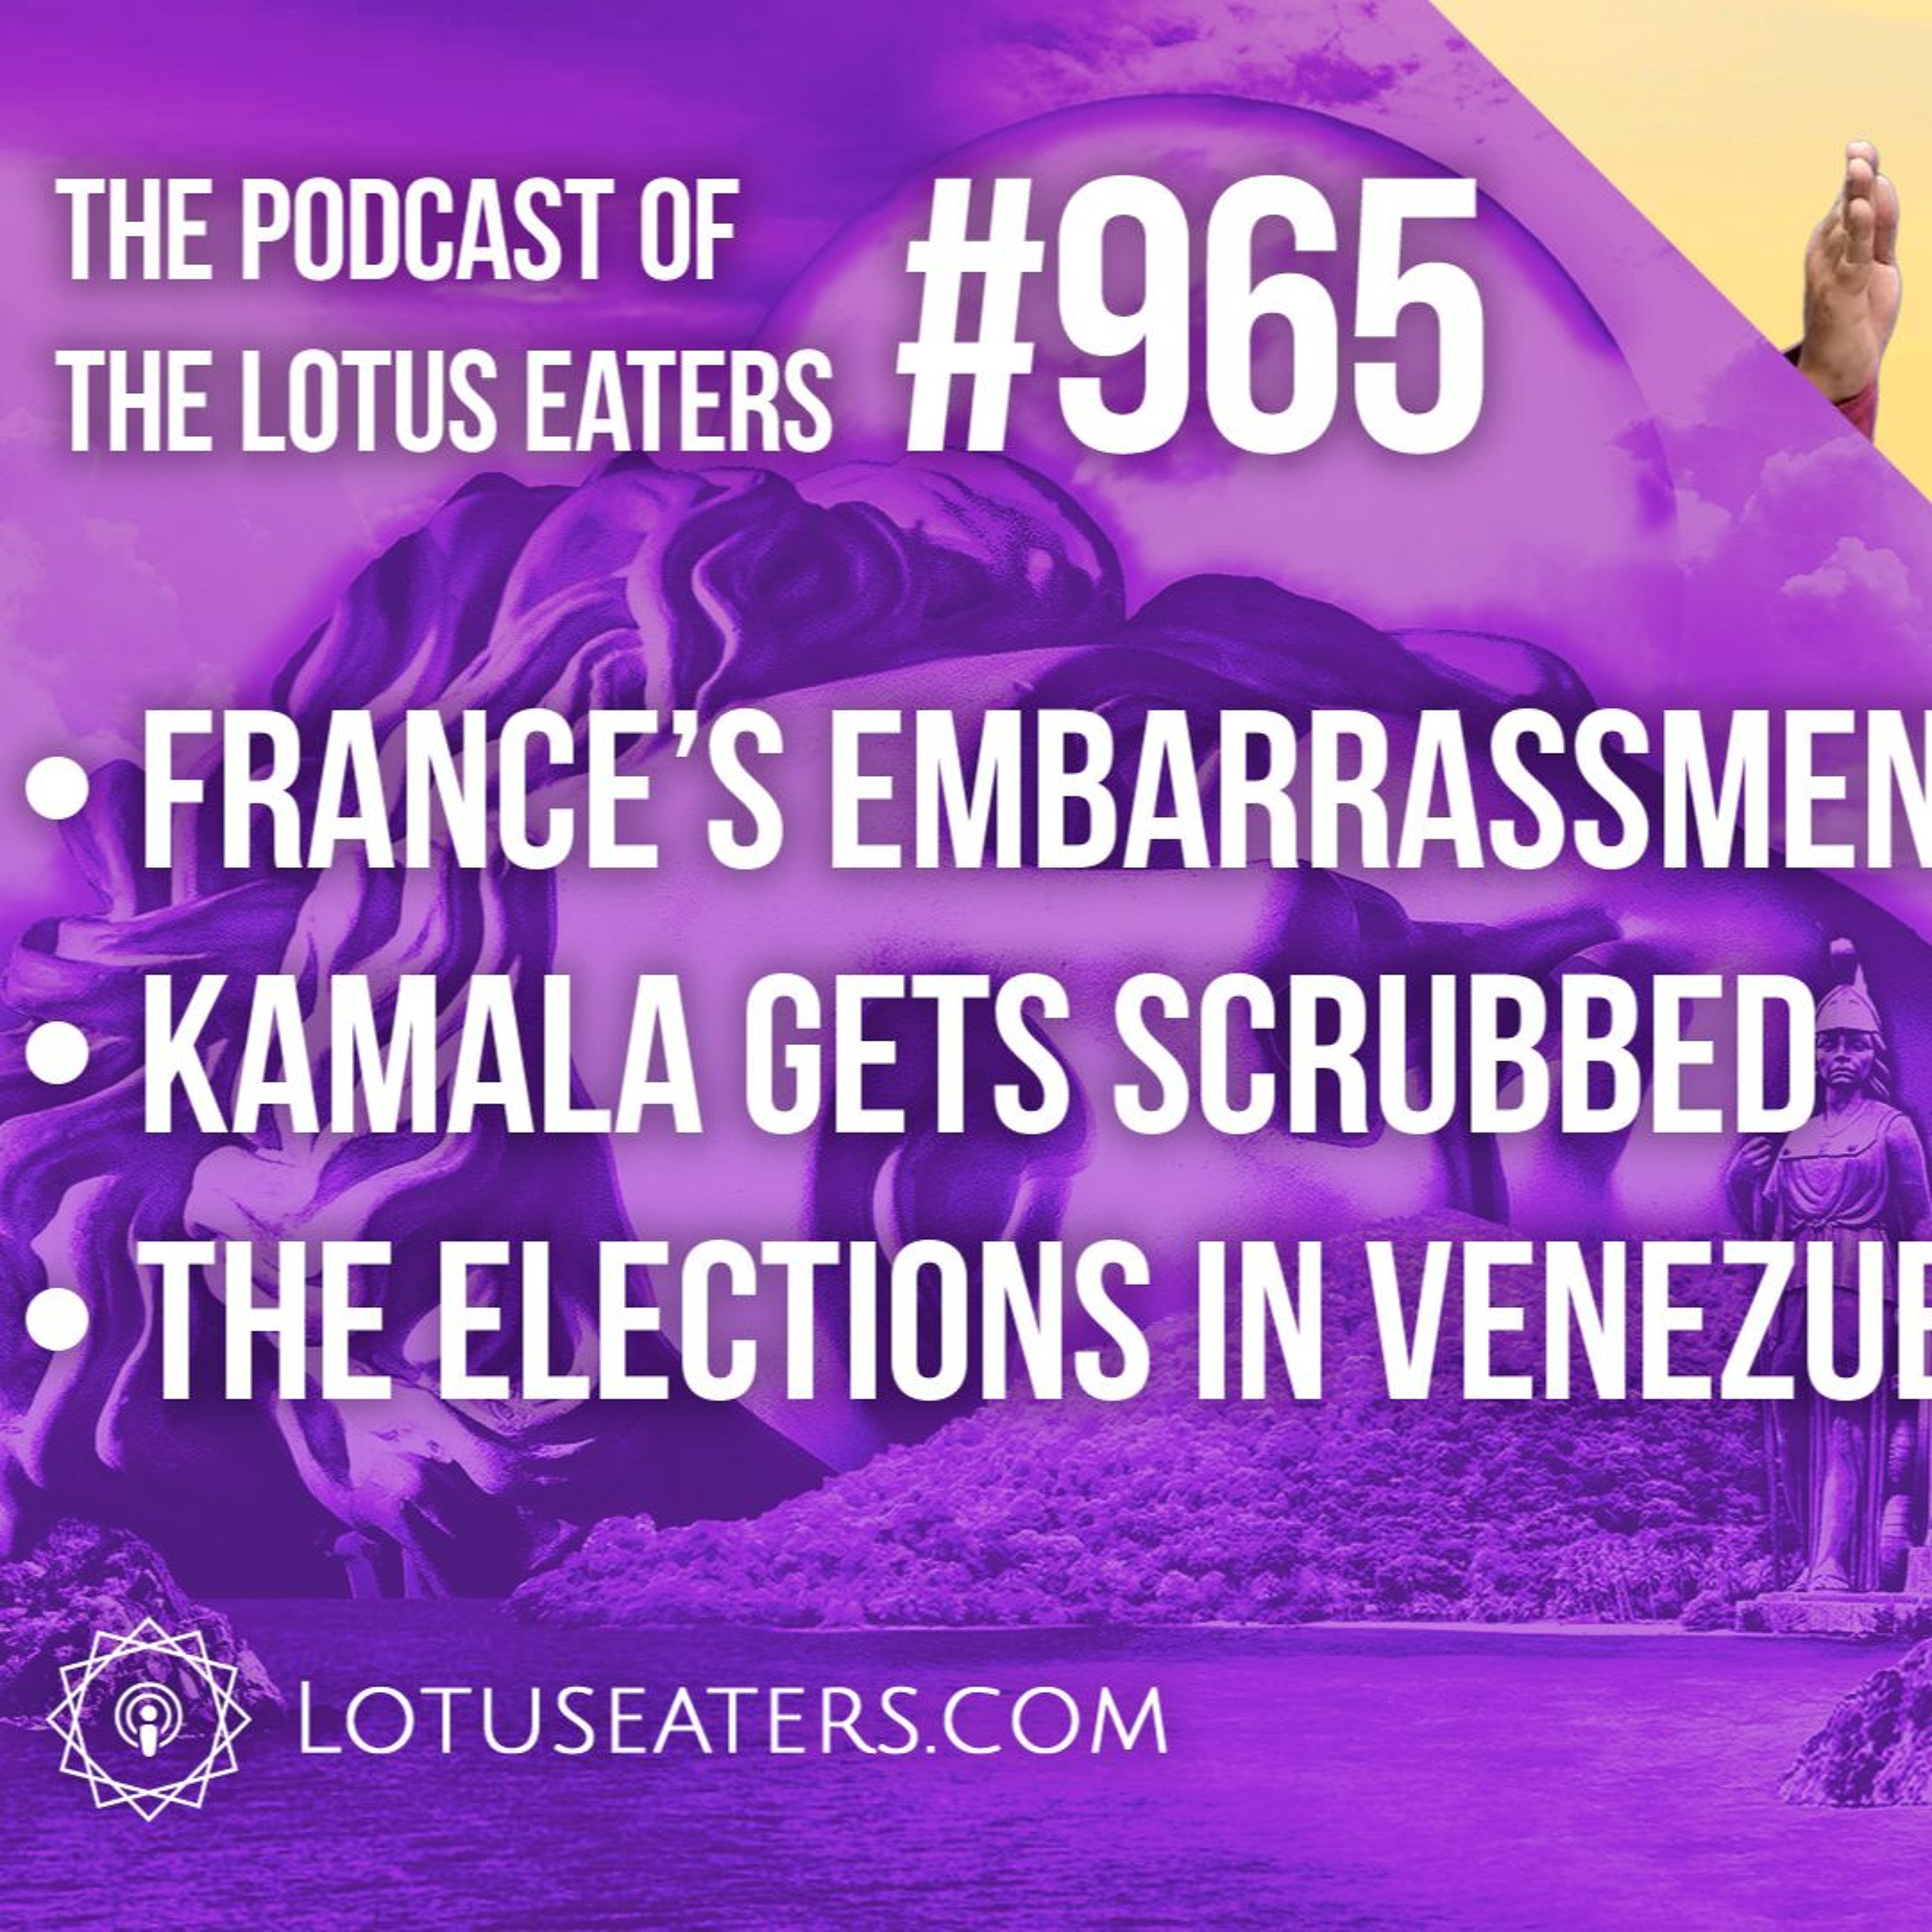 The Podcast of the Lotus Eaters #965